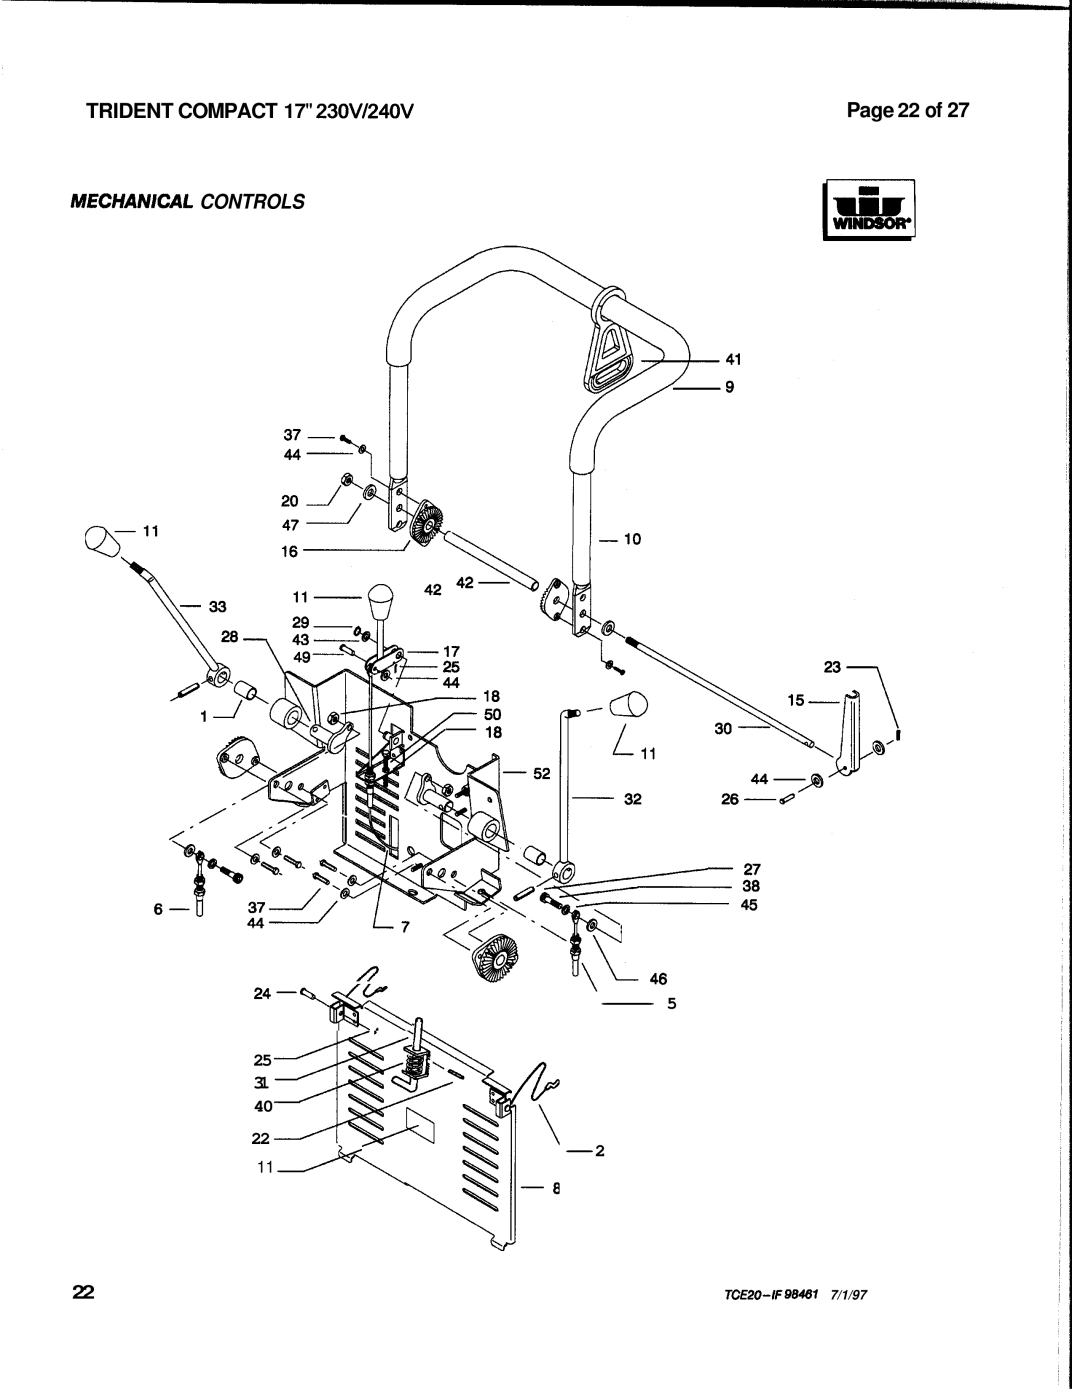 Windsor operating instructions Page 22 of, MECHANlCAL CONTROLS, TRIDENT COMPACT 17 230V/240V, TCE20-IF98461 7/1/97 